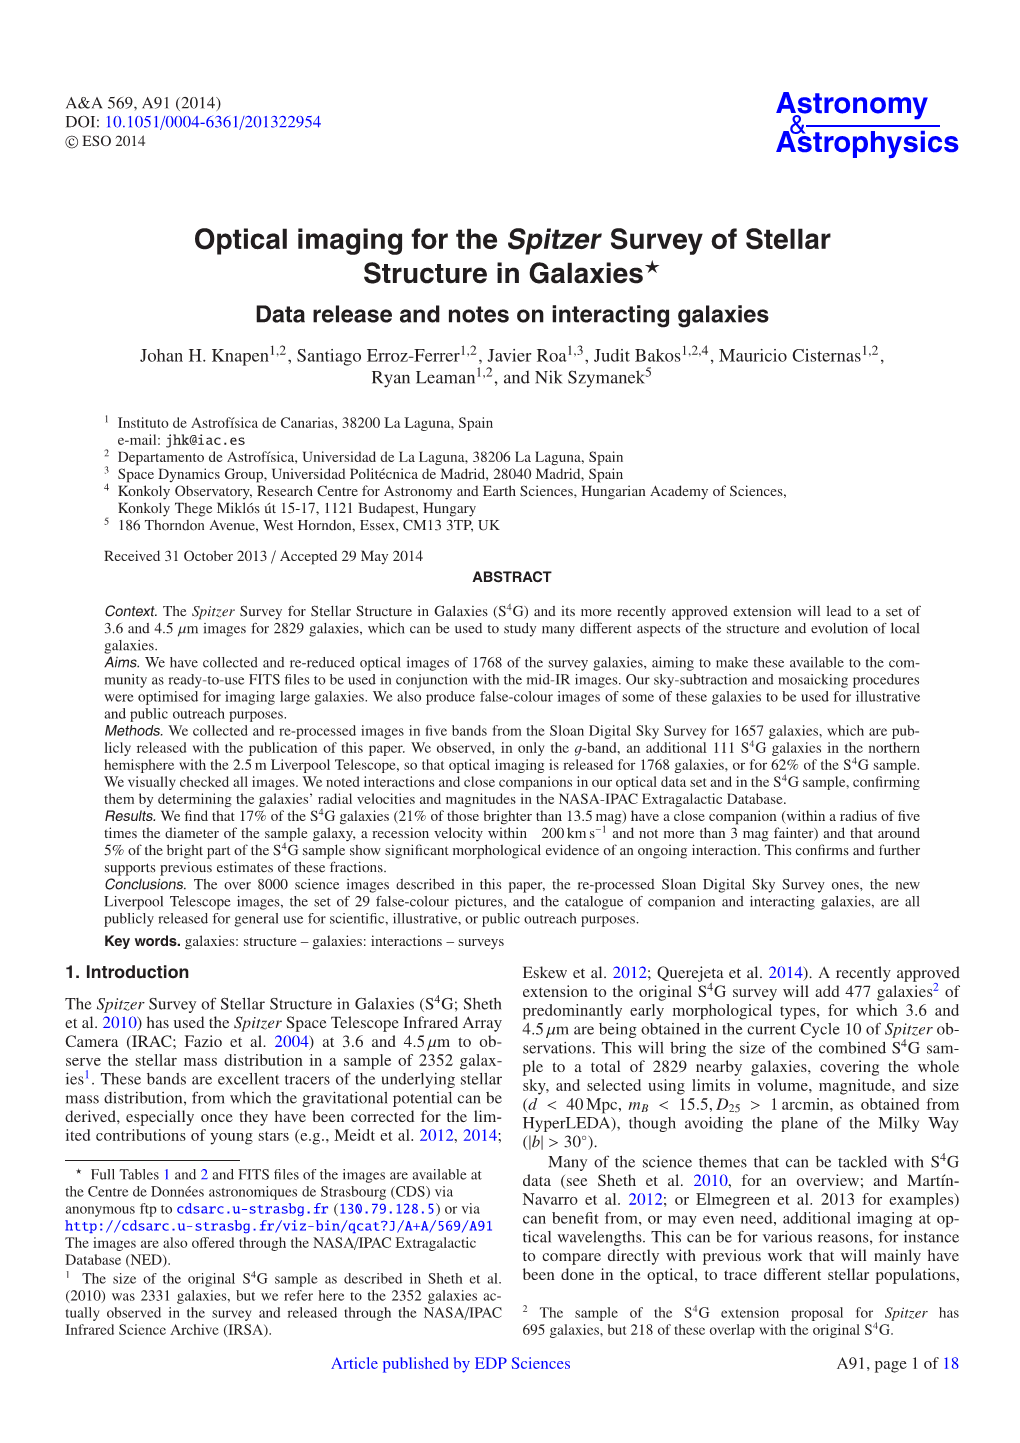 Optical Imaging for the Spitzer Survey of Stellar Structure in Galaxies⋆